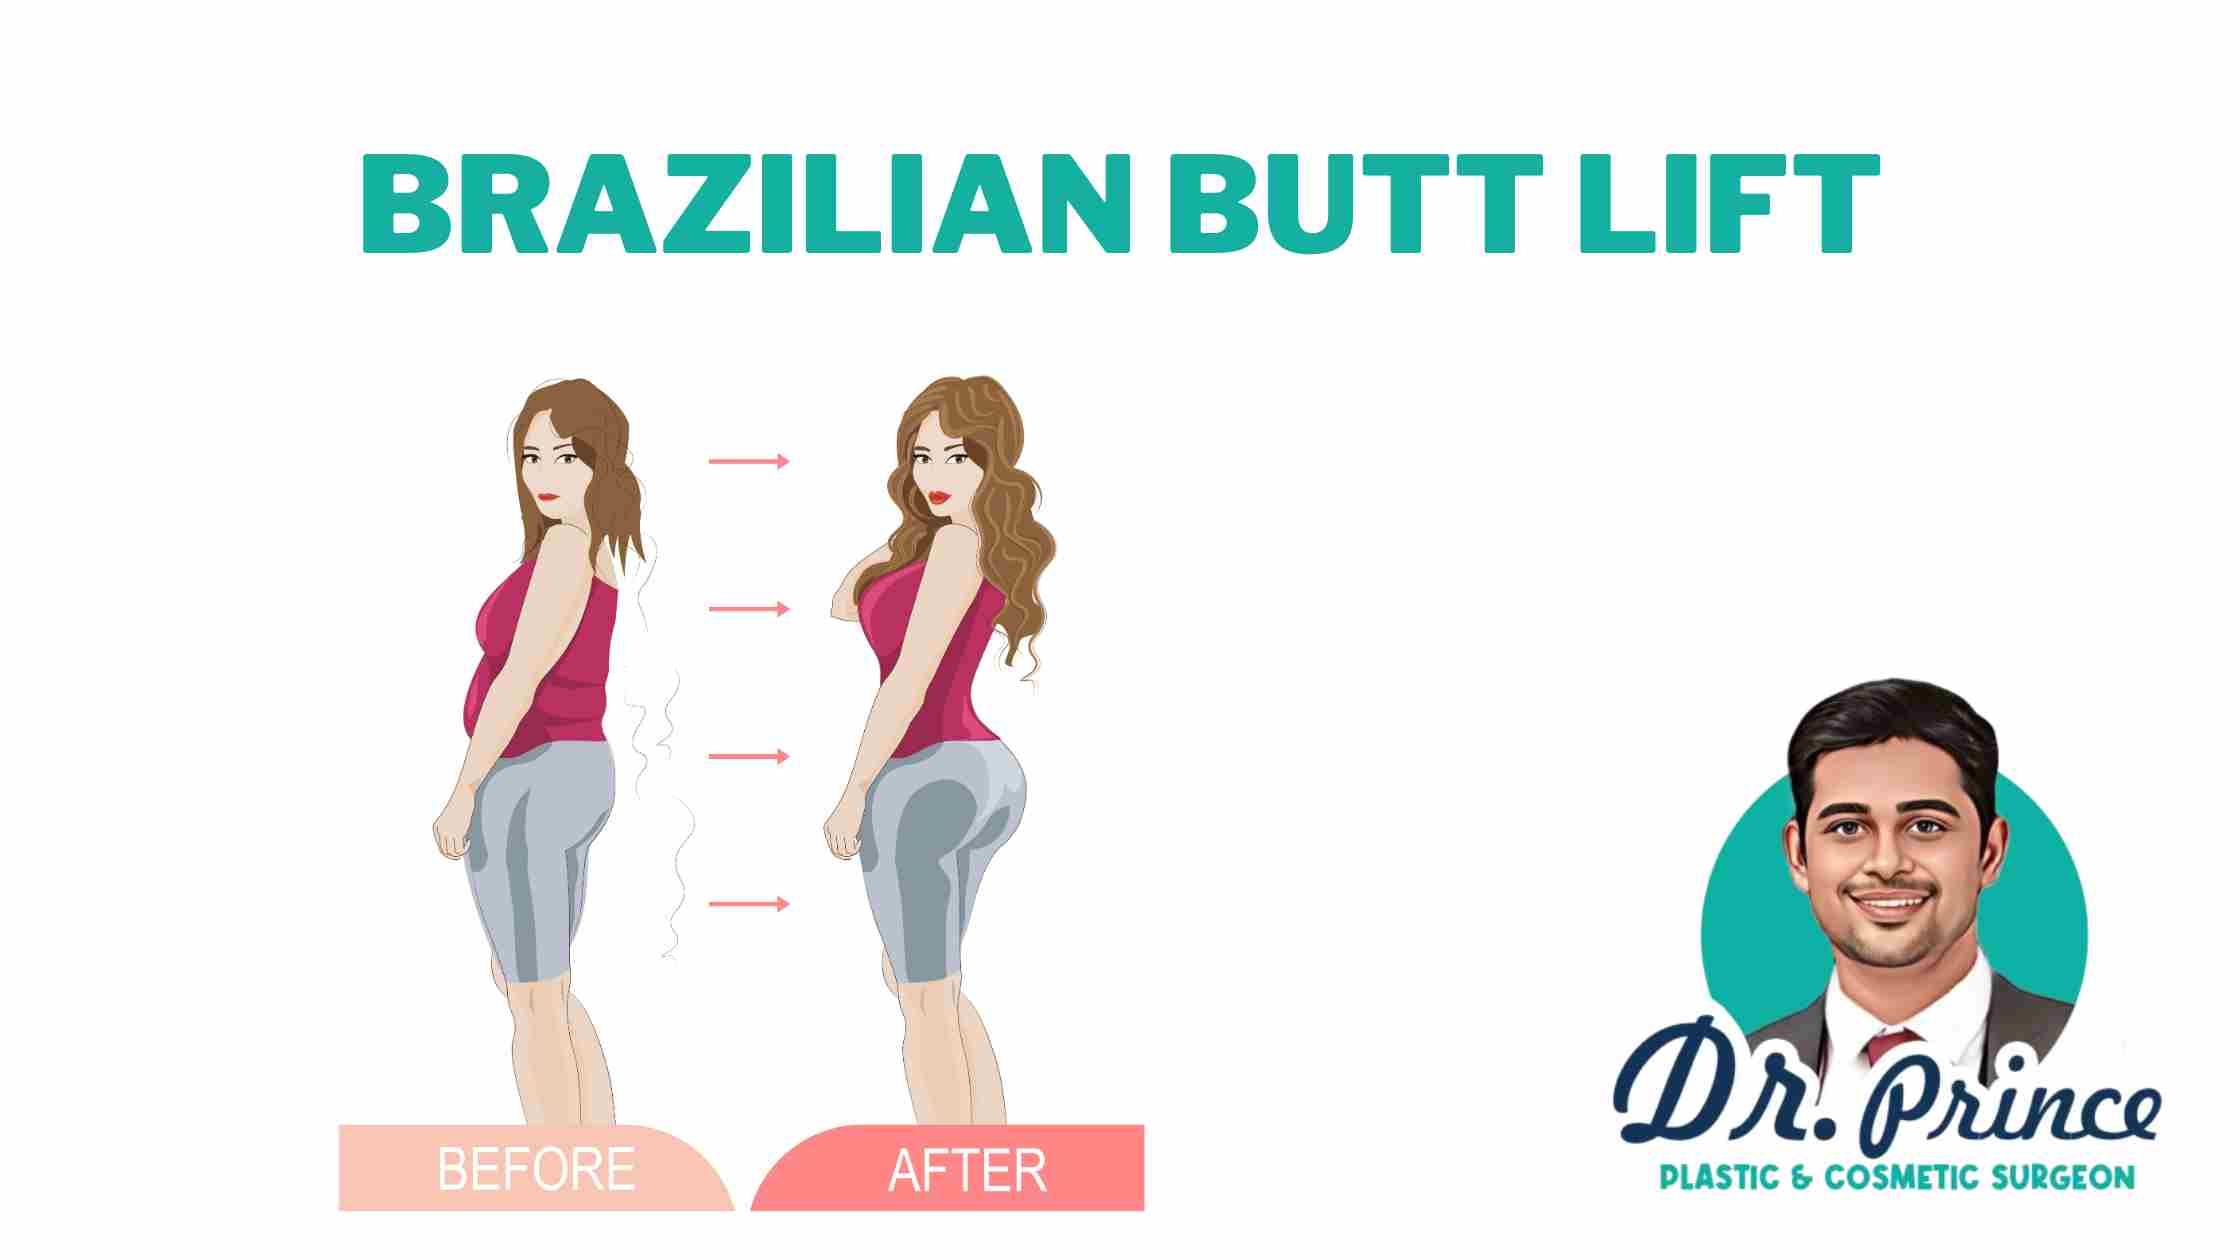 Dr. Prince performing a Brazilian Butt Lift surgery, enhancing buttock shape and volume through fat transfer.